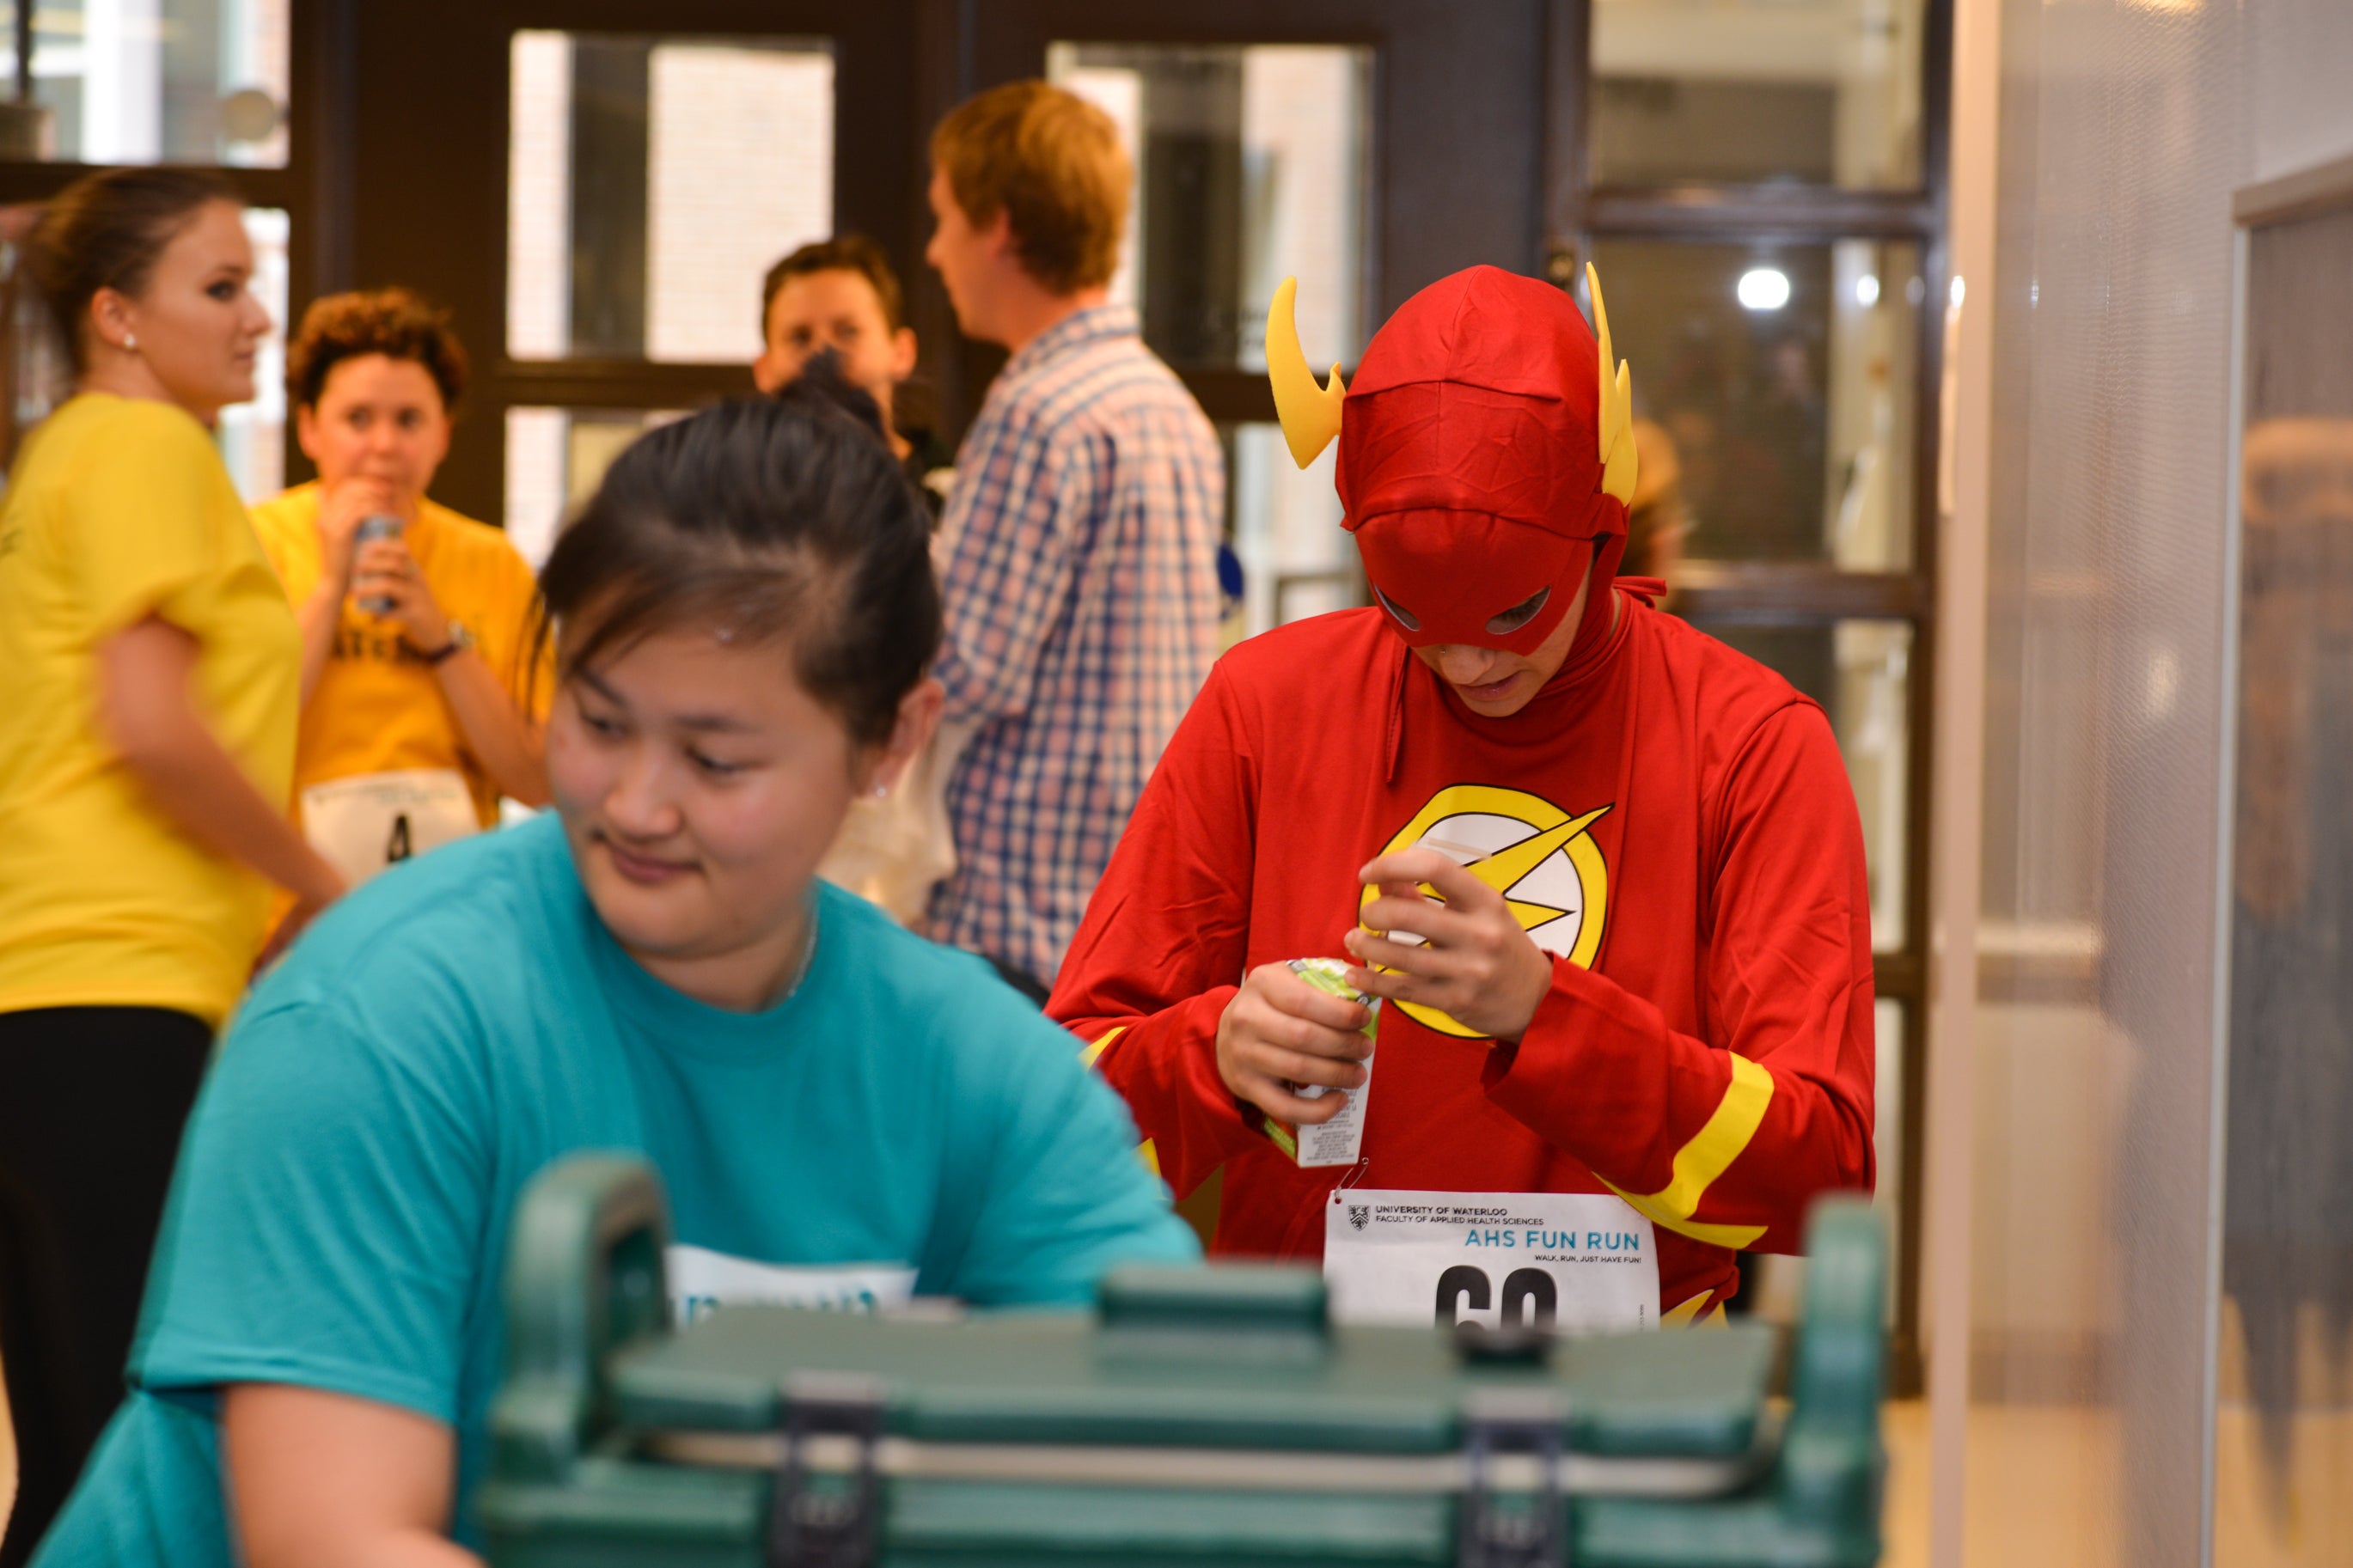 Student dressed as flash character getting a drink